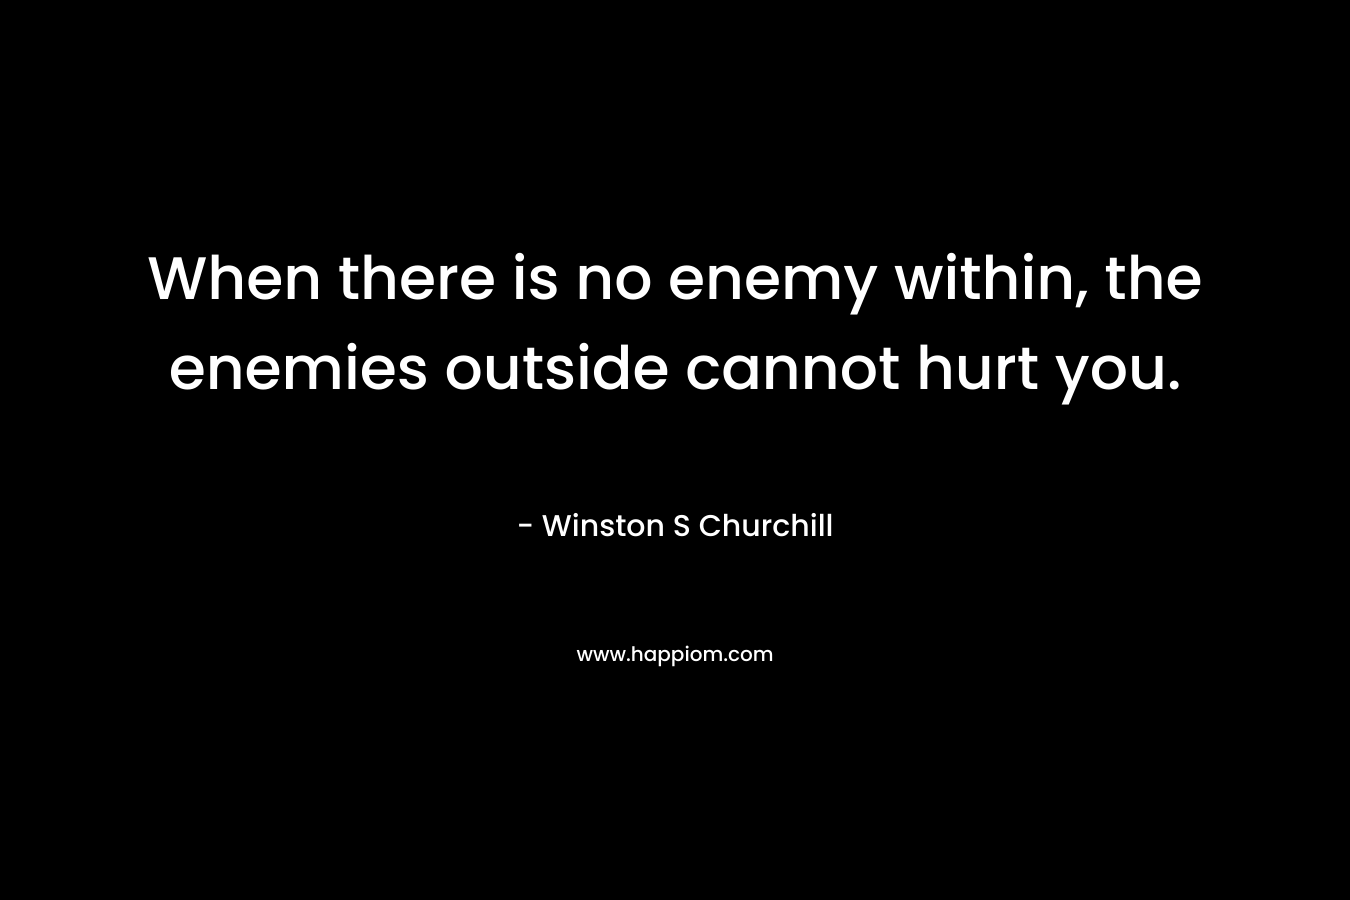 When there is no enemy within, the enemies outside cannot hurt you. – Winston S Churchill